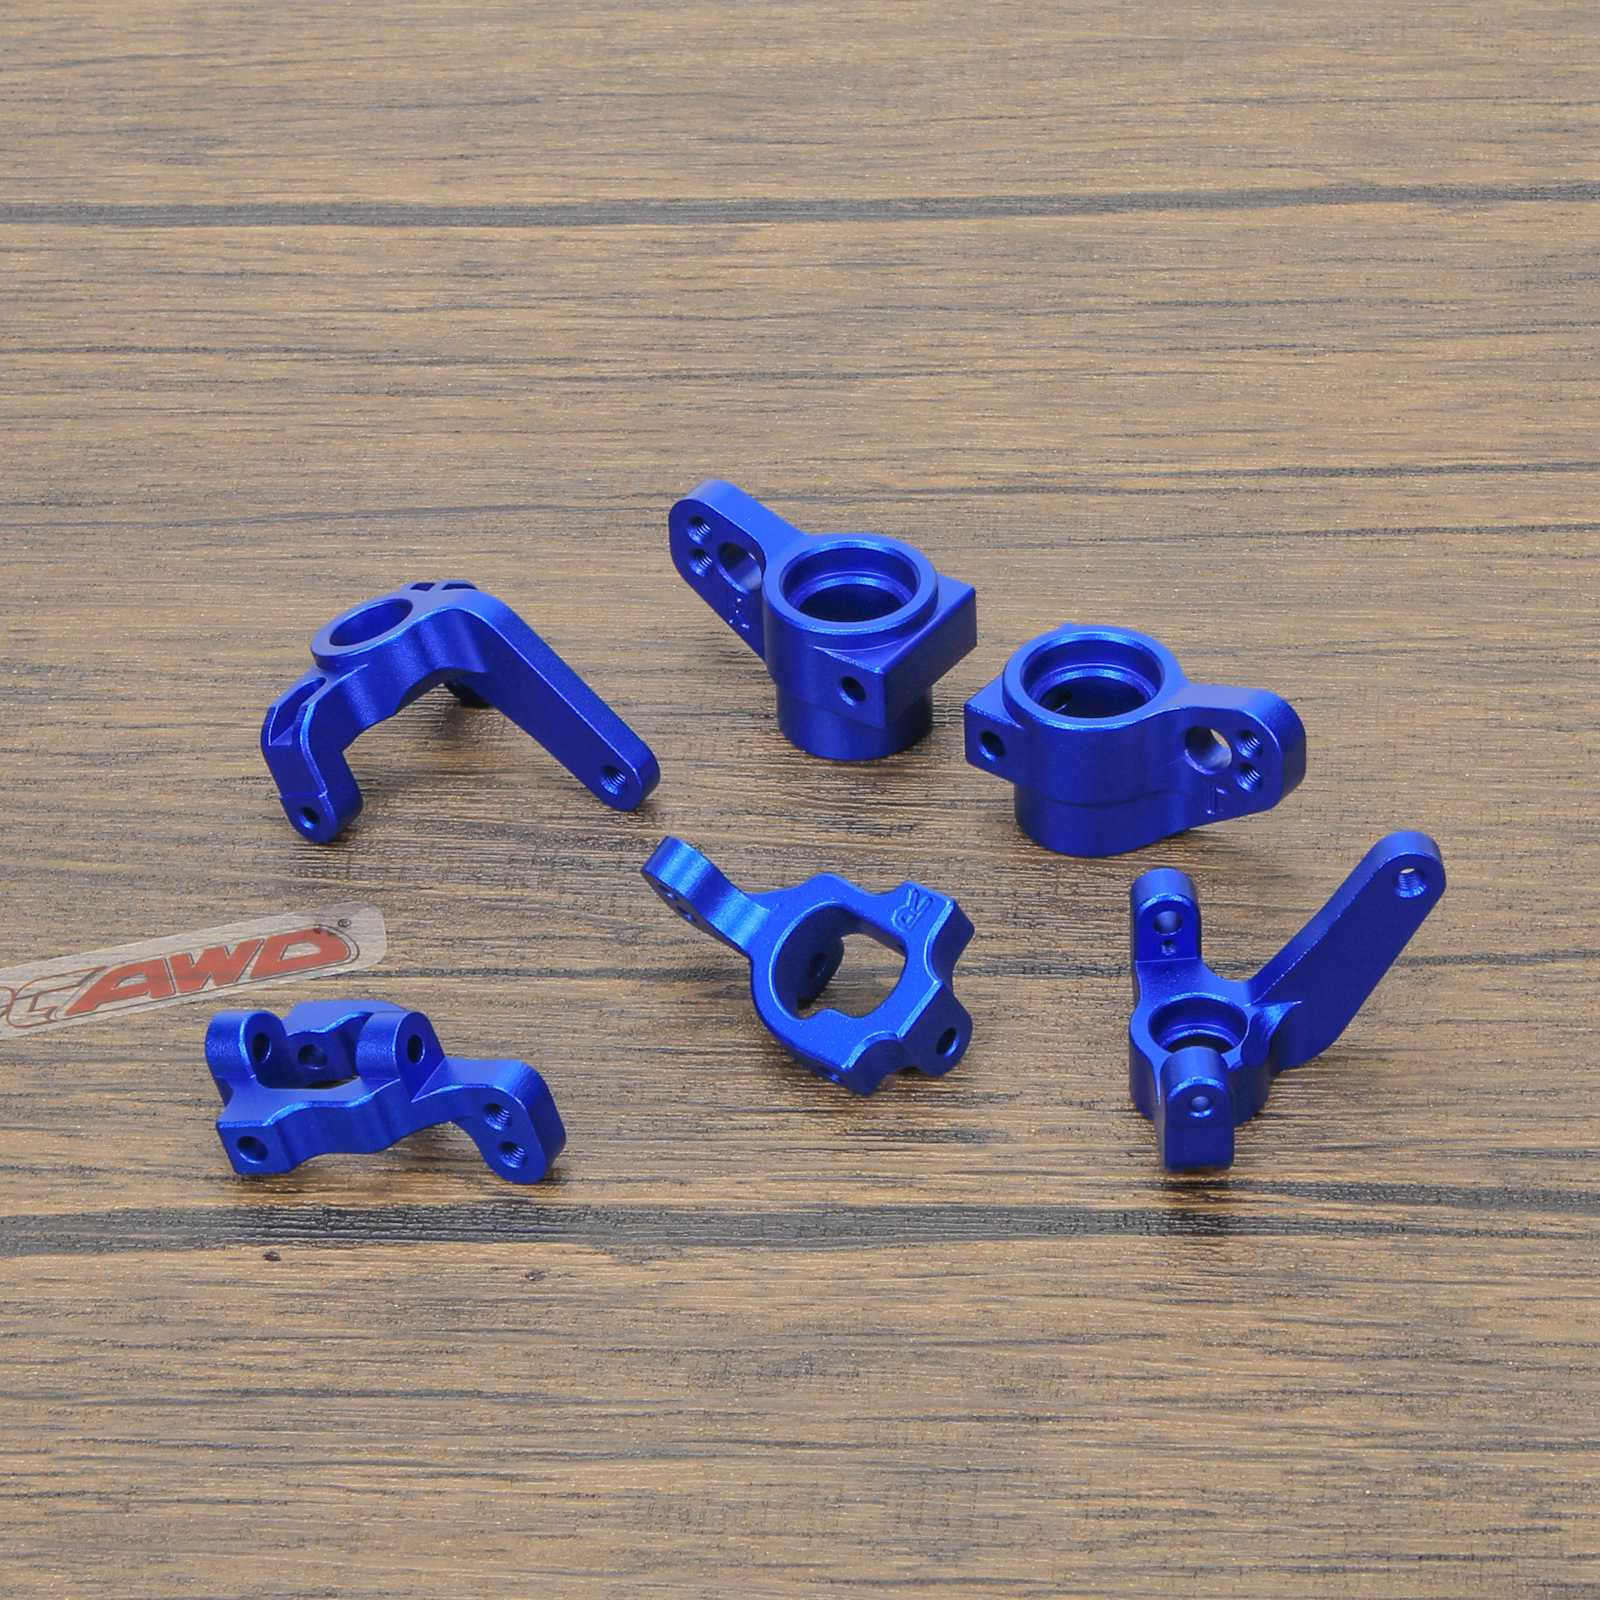 RCAWD Losi 22S Navy Blue RCAWD Losi 22s Upgrades Caster Block Set & Rear Hub Set & Front Spindle Set 6pcs for Camaro Ford F100